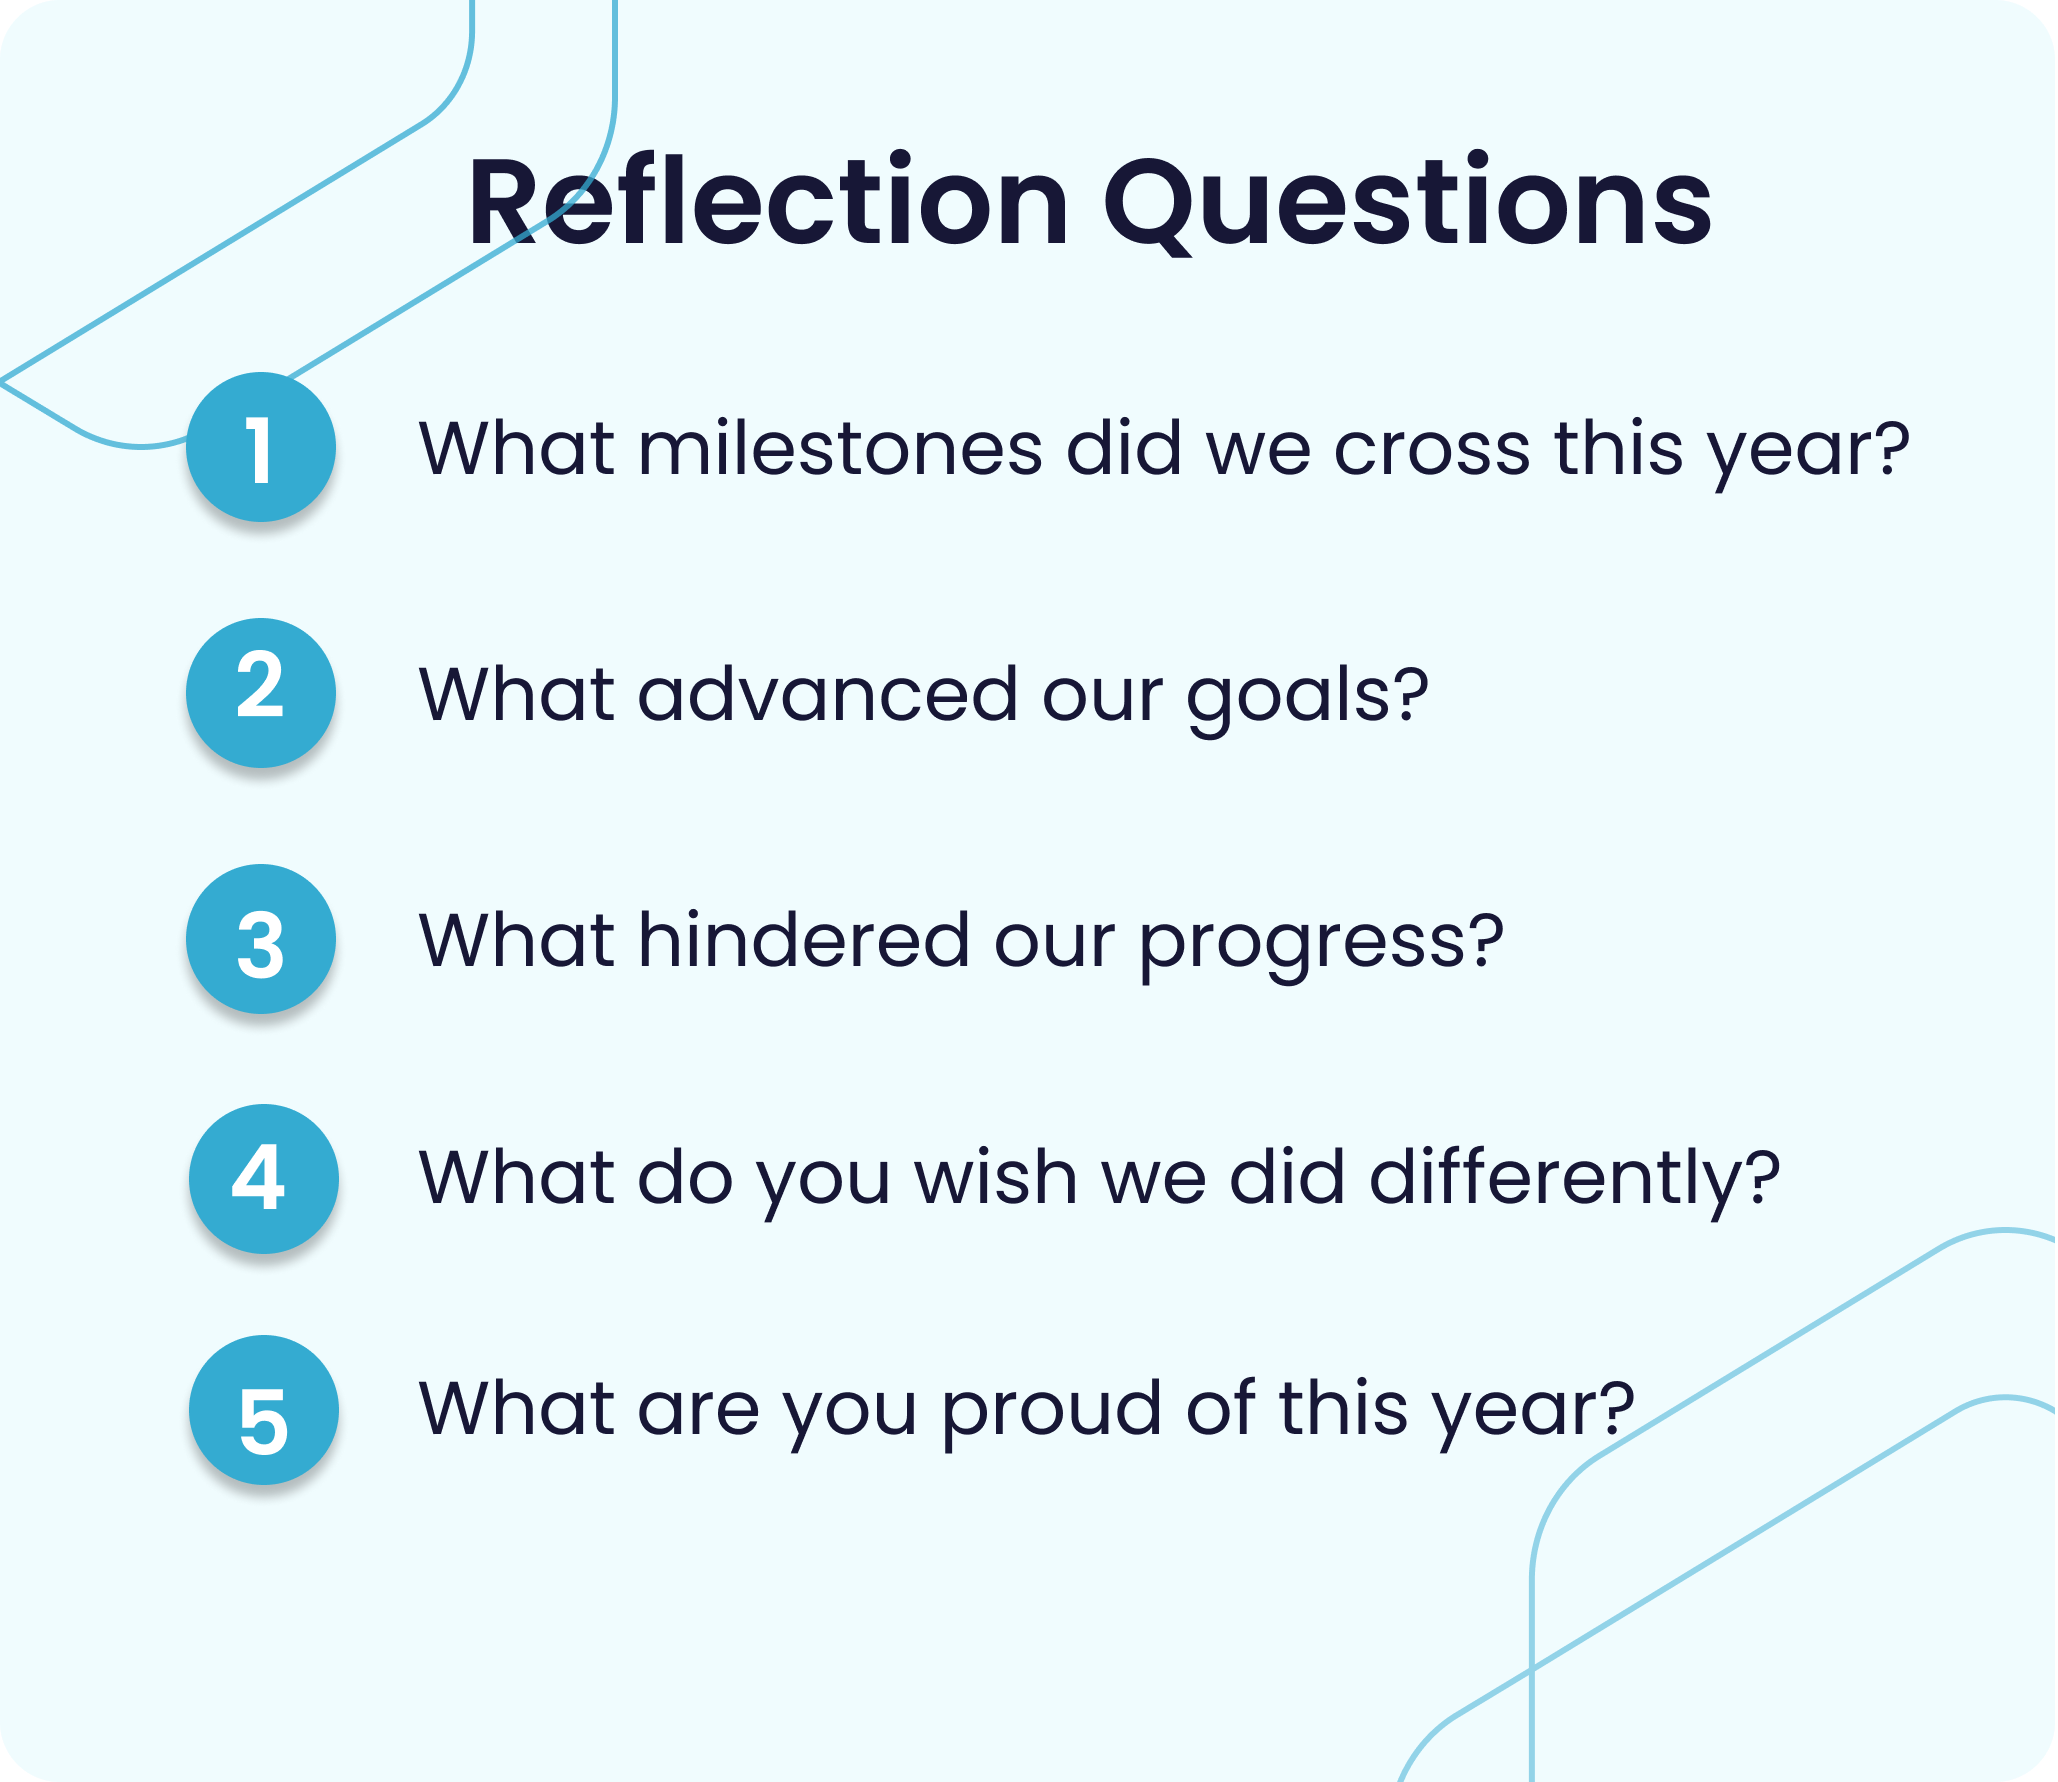 Reflection questions: What milestones did we cross this year? What advanced our goals? What hindered our progress? What are you proud of this year? What do you wish we did differently?